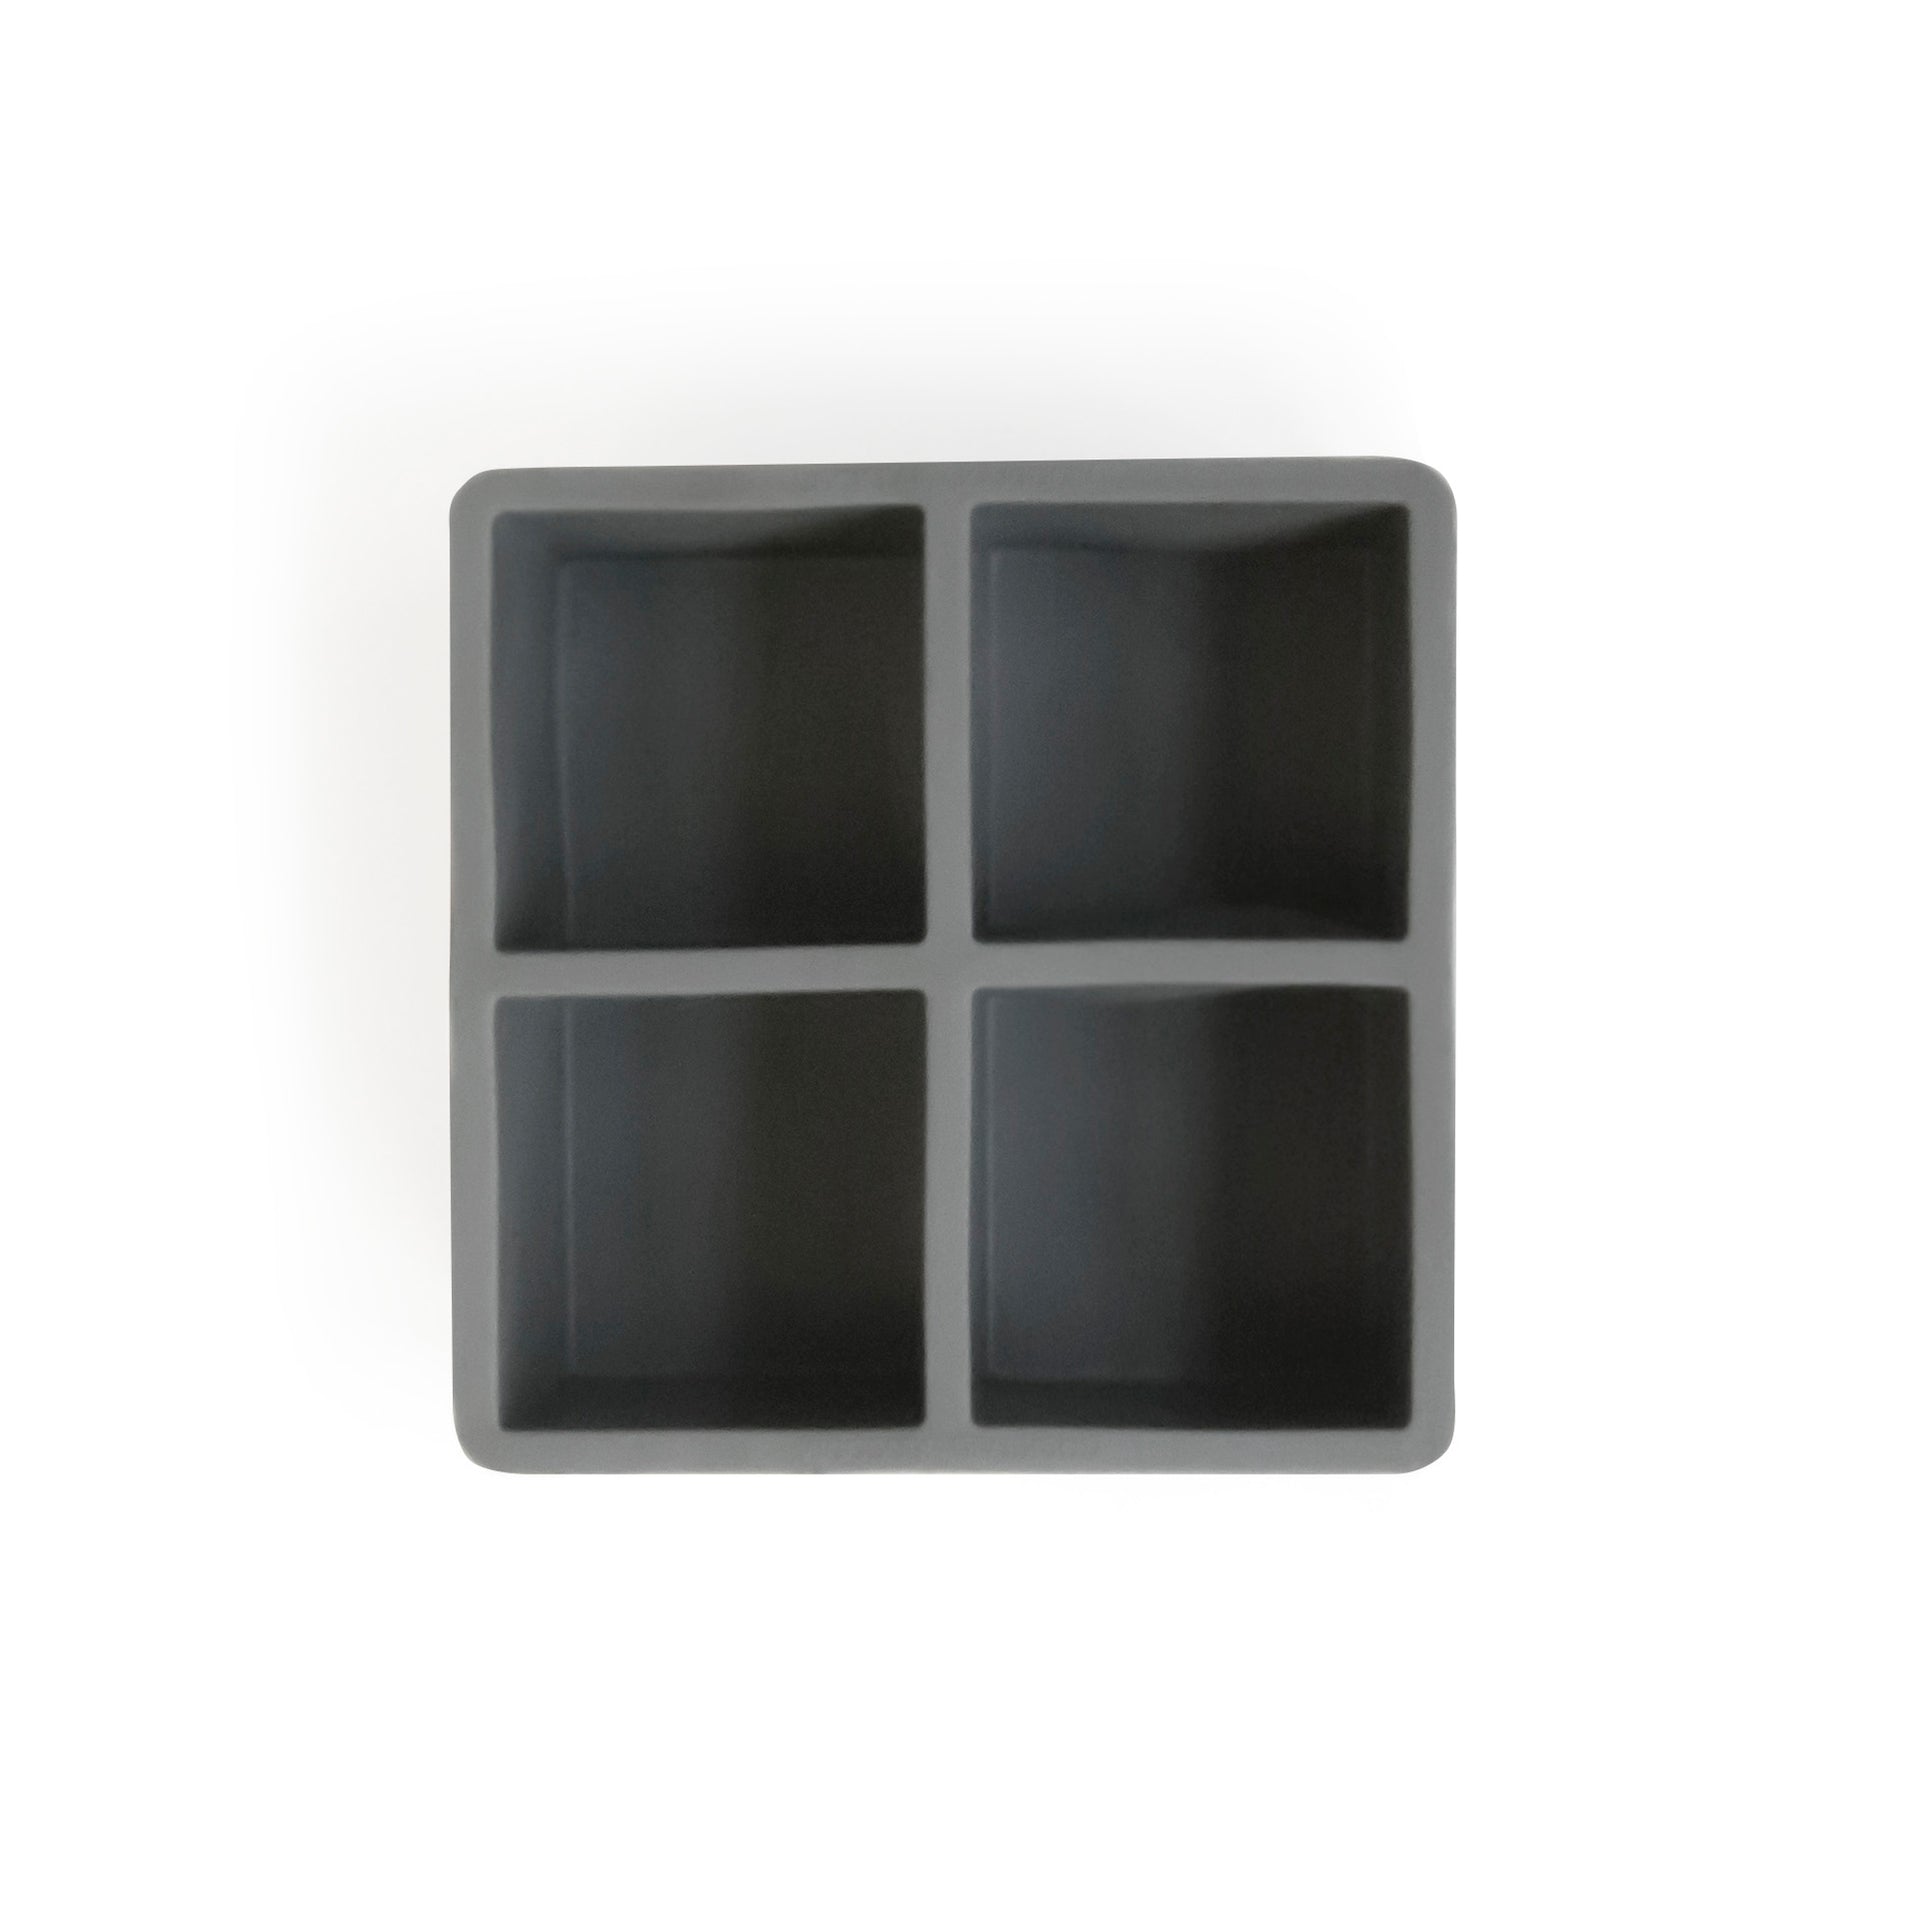 Large Square Stainless Steel Ice Cube Tray - The Vermont Country Store